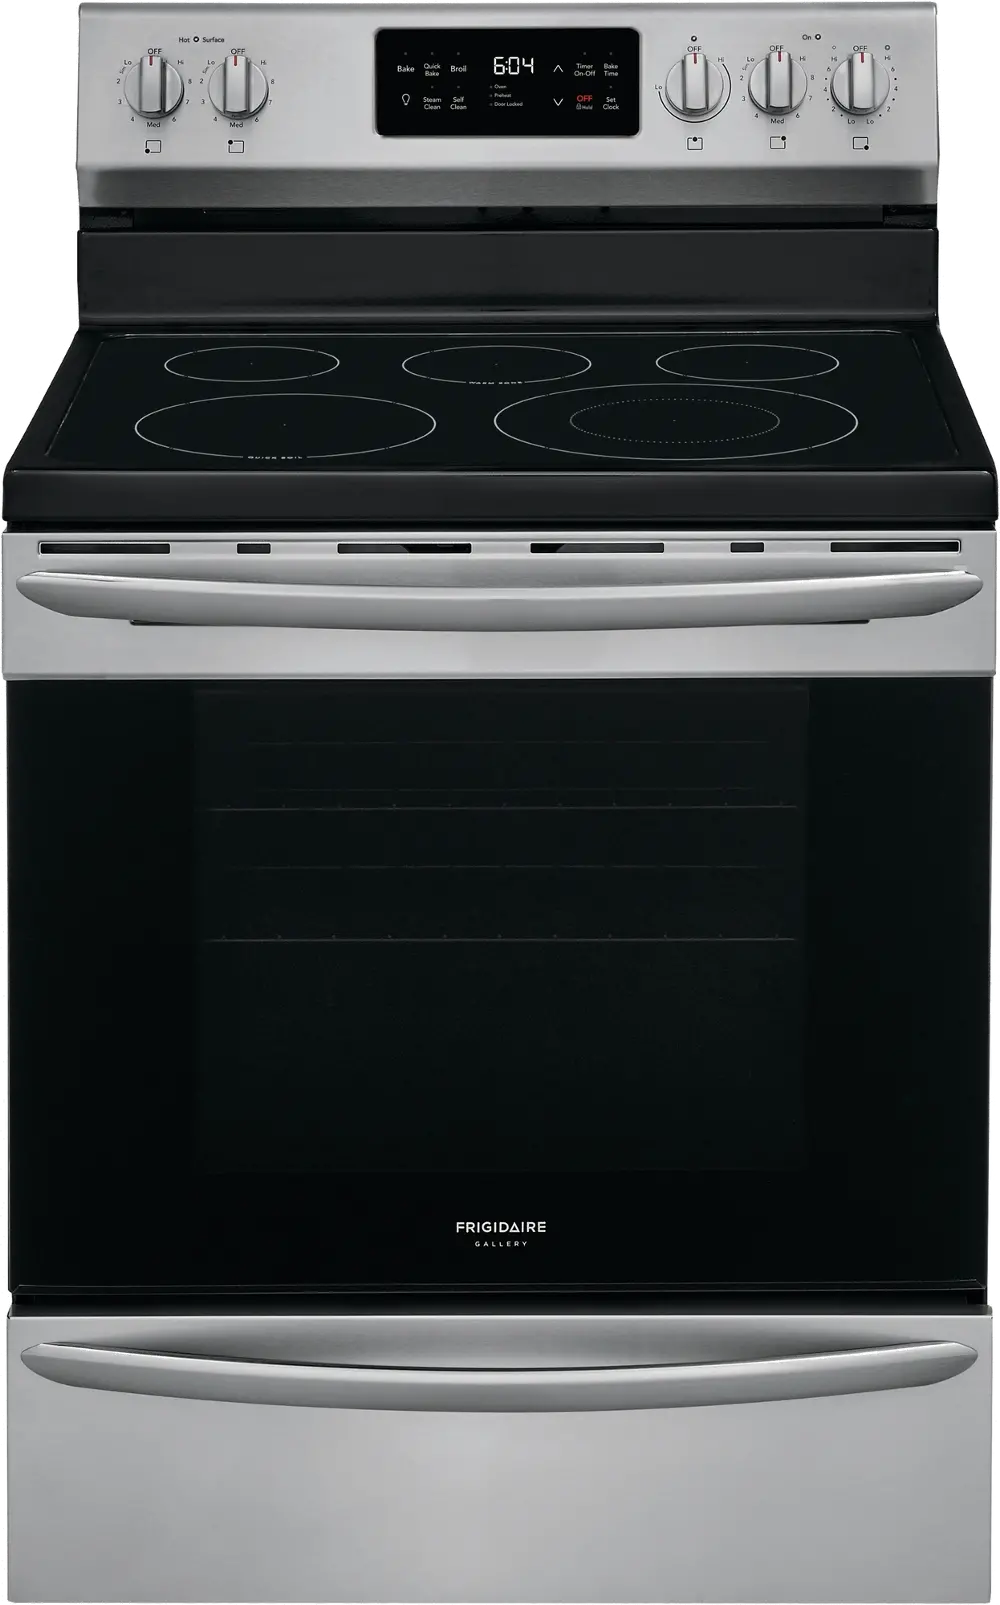 GCRE3038AF Frigidaire Gallery 5.4 cu ft Electric Range - Stainless Steel-1